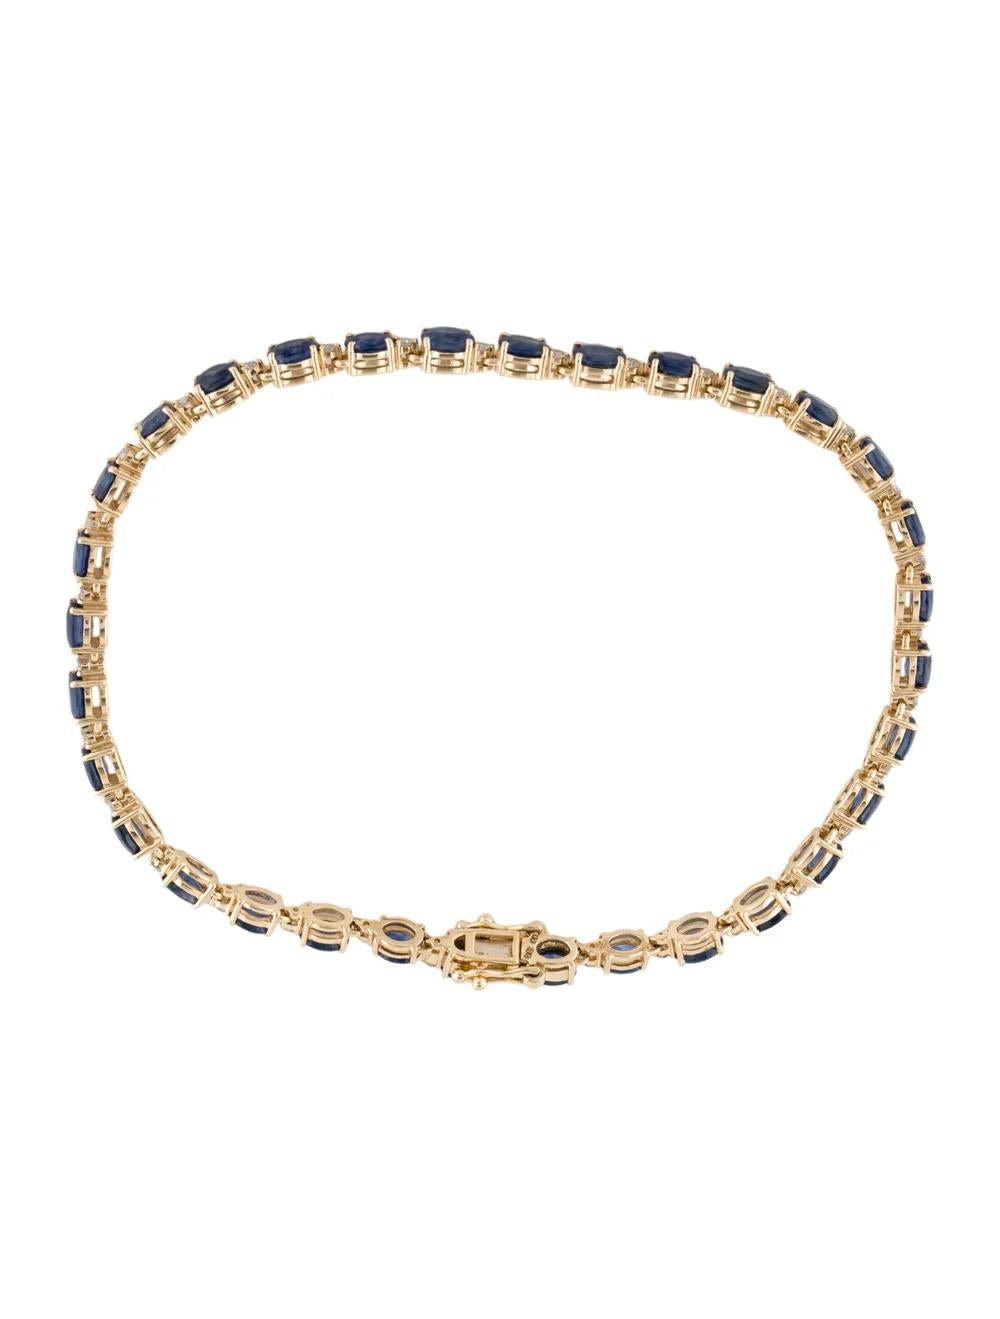 14K Gold 5.76ctw Sapphire & Diamond Link Bracelet - Elegant Statement Jewelry In New Condition For Sale In Holtsville, NY